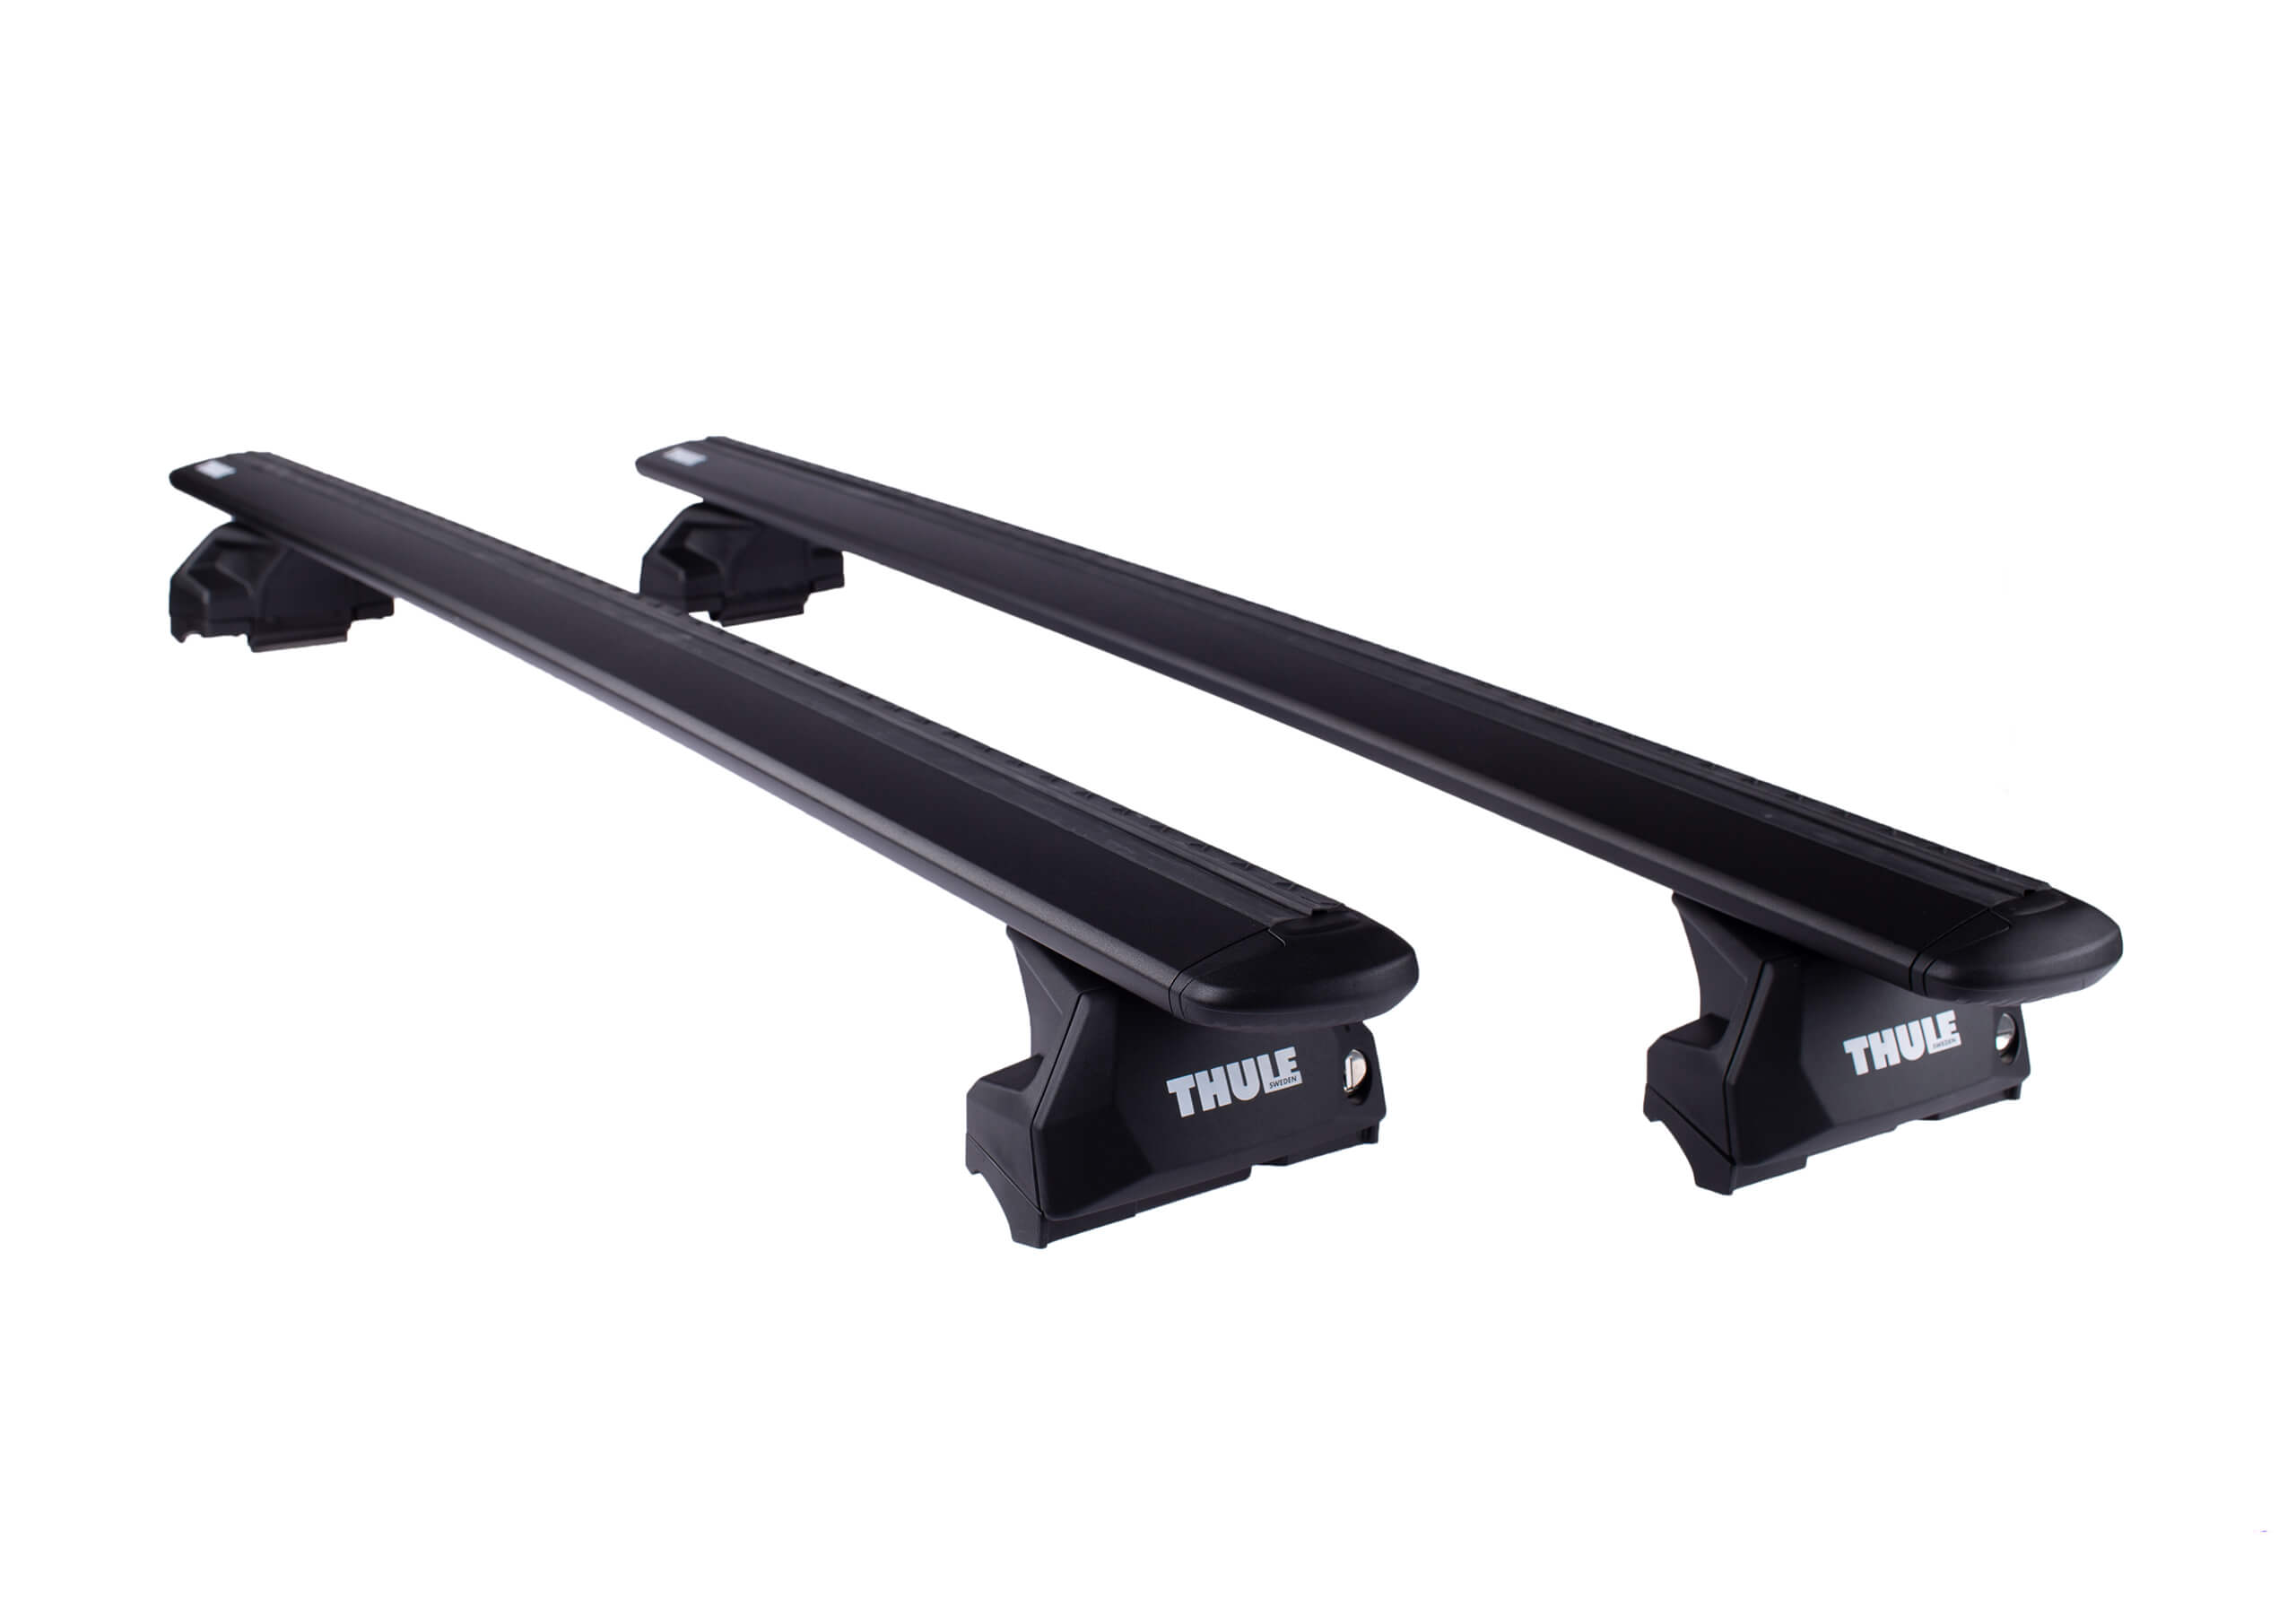 Ford Mondeo estate (2007 to 2014):Thule black WingBars package - 7106, 7112B, 6022